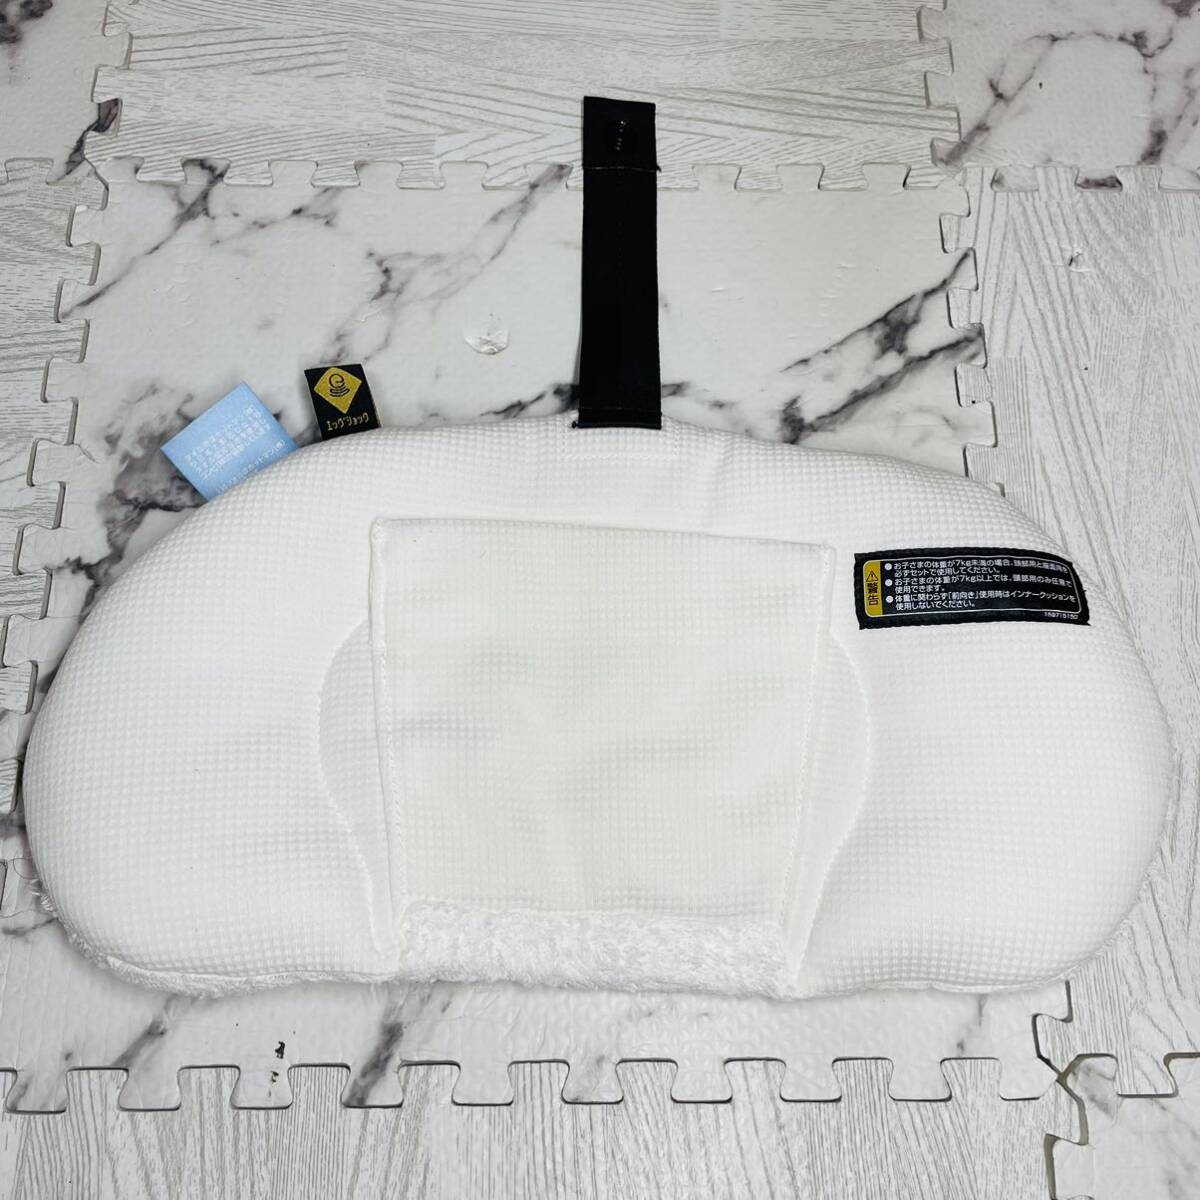  prompt decision super-beauty goods combikru Move child seat head pillowcase postage included 6000 jpy . discounted first come, first served lavatory settled combination JJ600